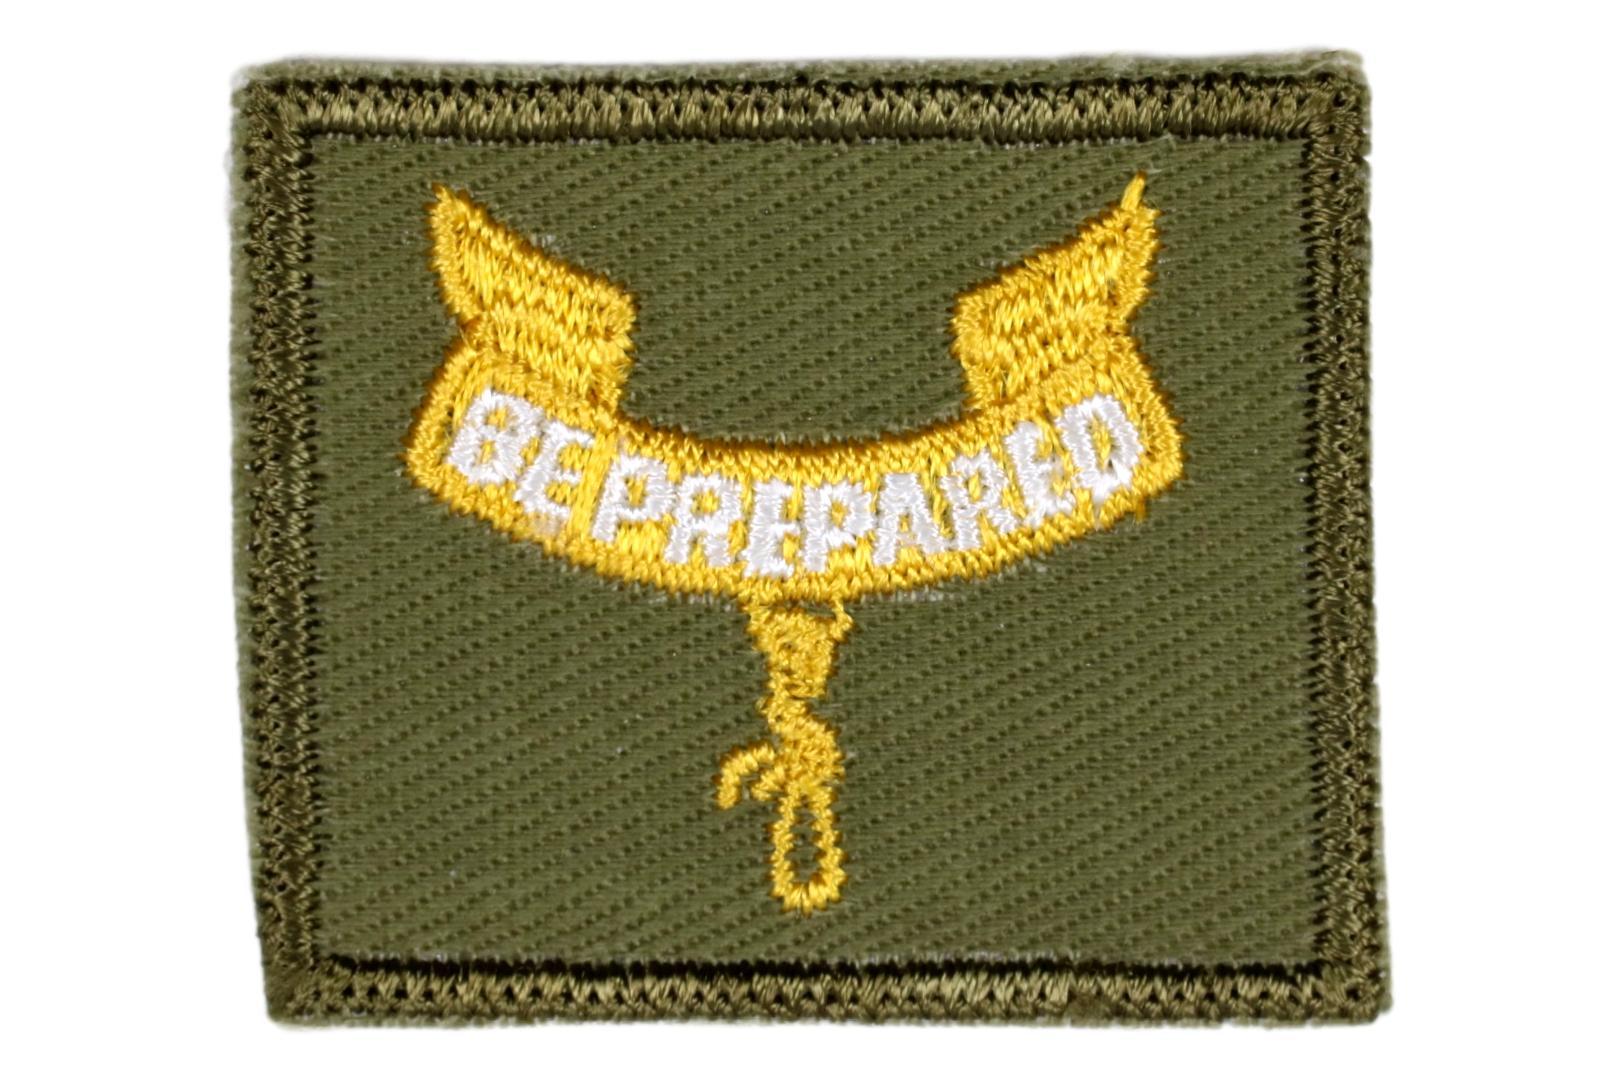 Second Class Rank Patch 1960s Type 9A Rough Twill Gauze Back